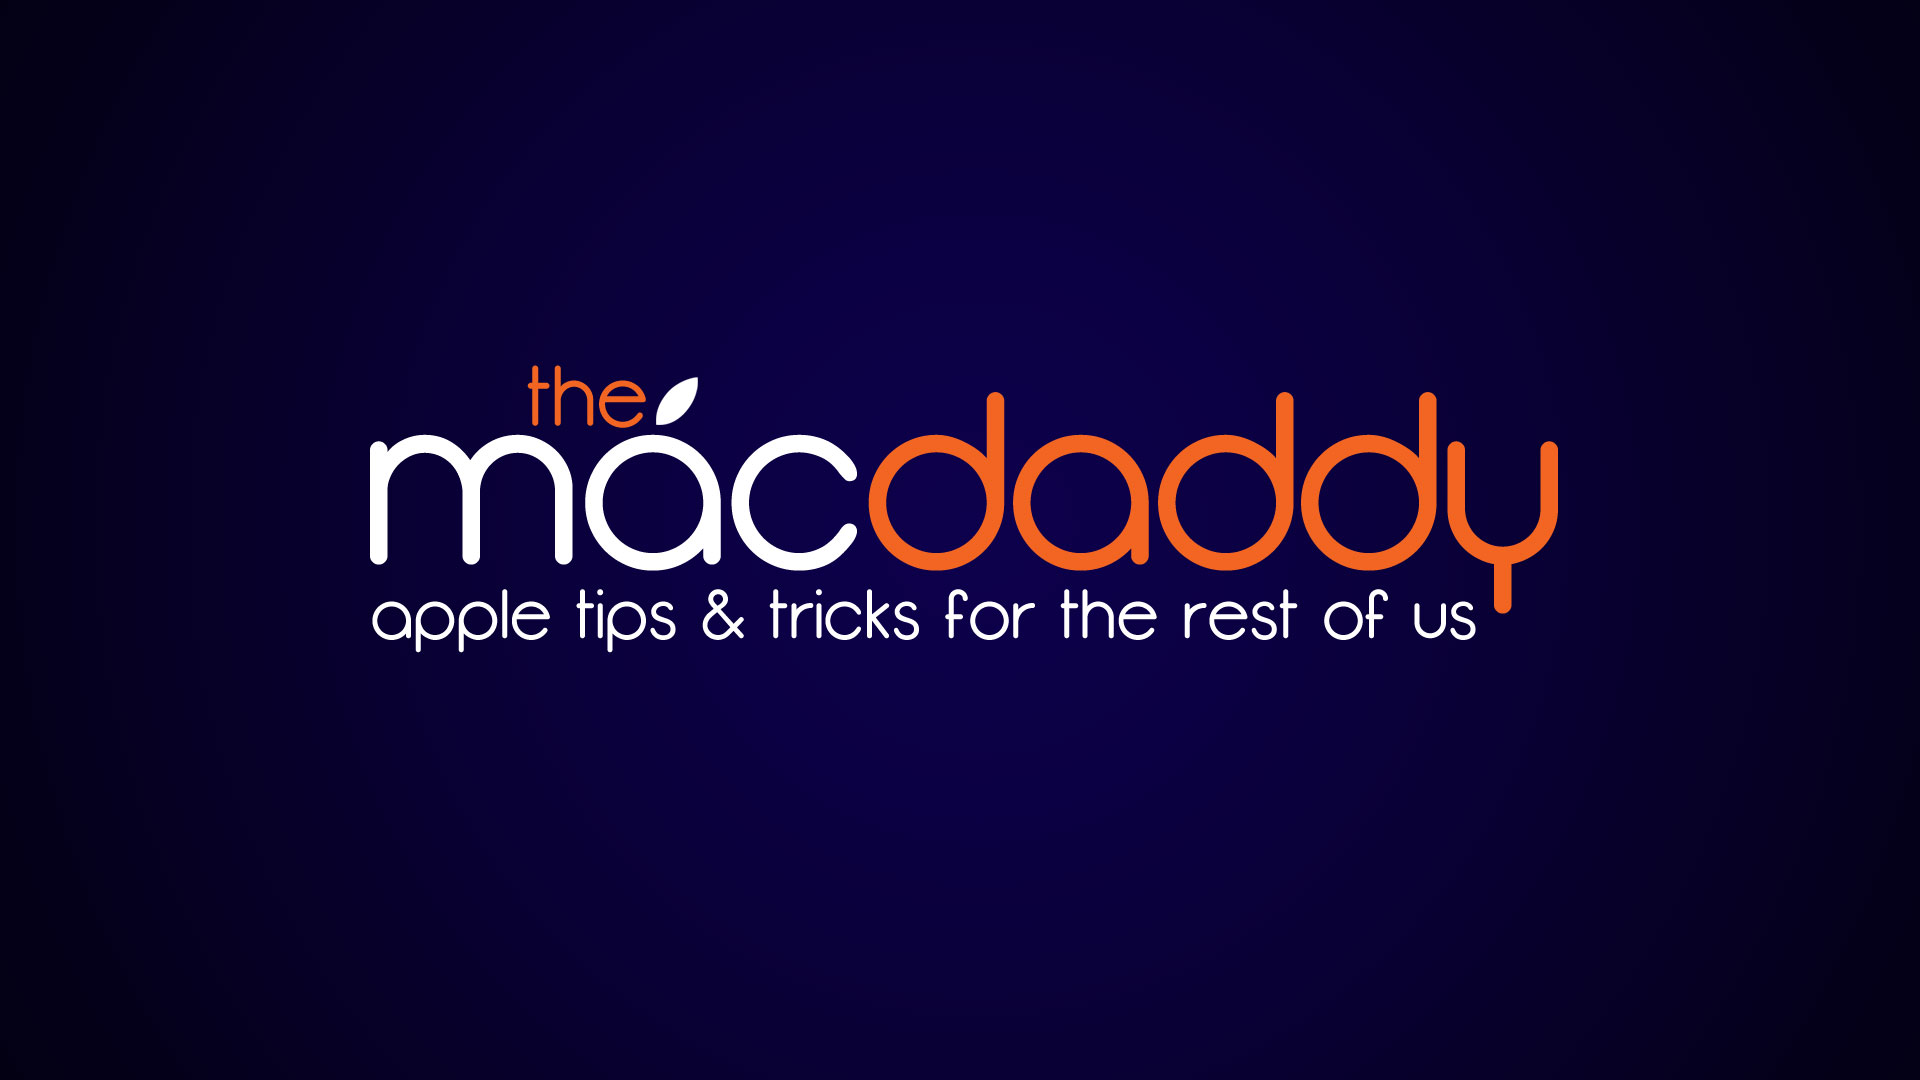 The MacDaddy